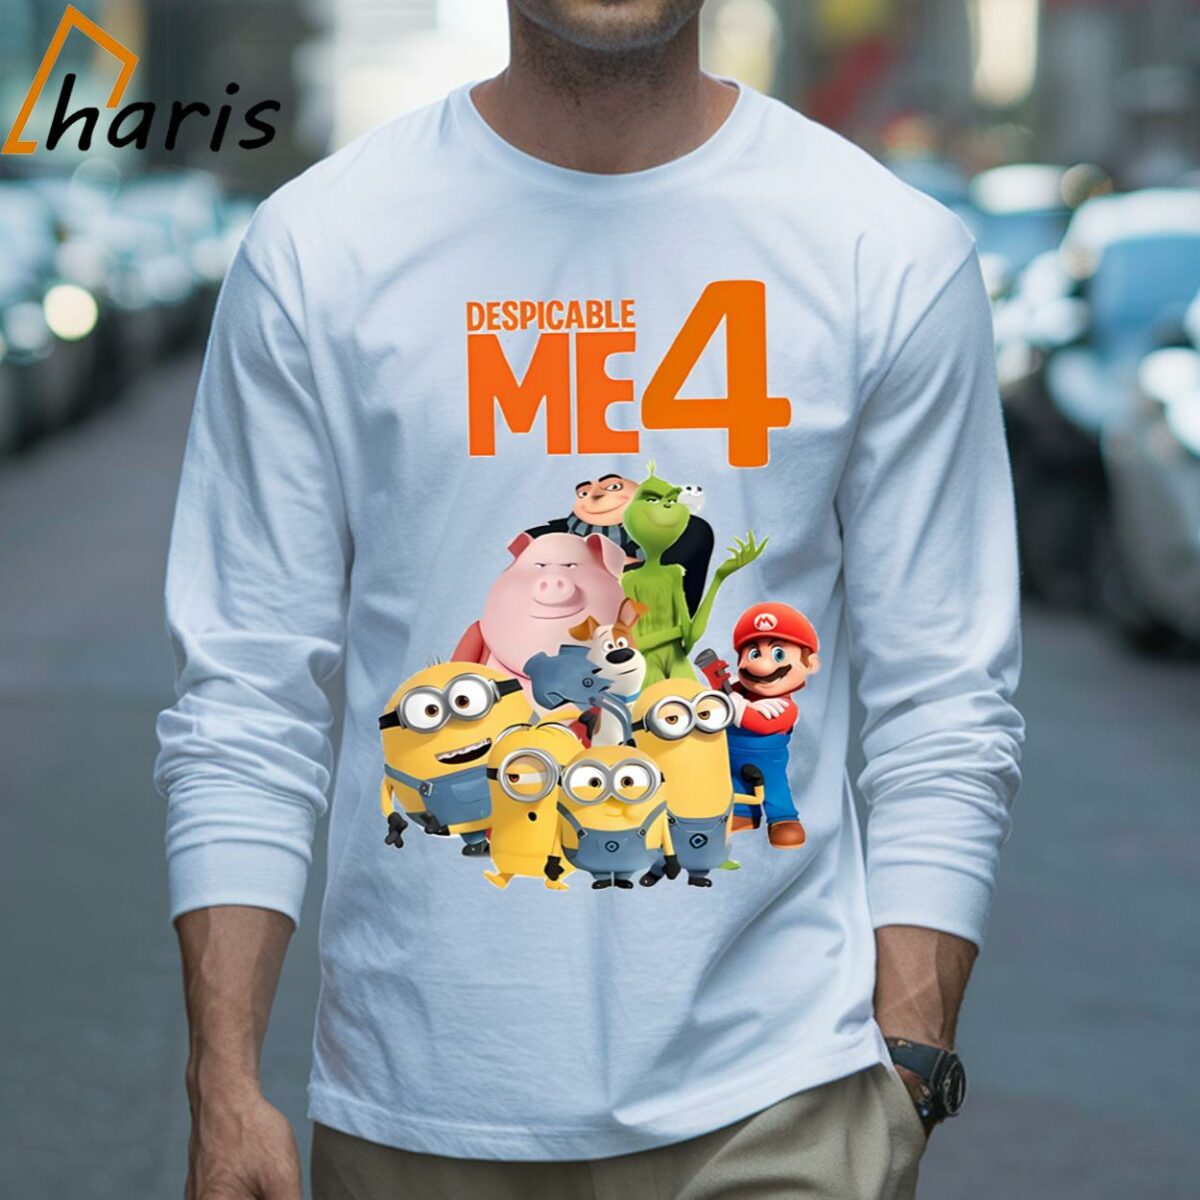 Despicable Me 4 Movie Shirt For Fans 3 Long sleeve shirt